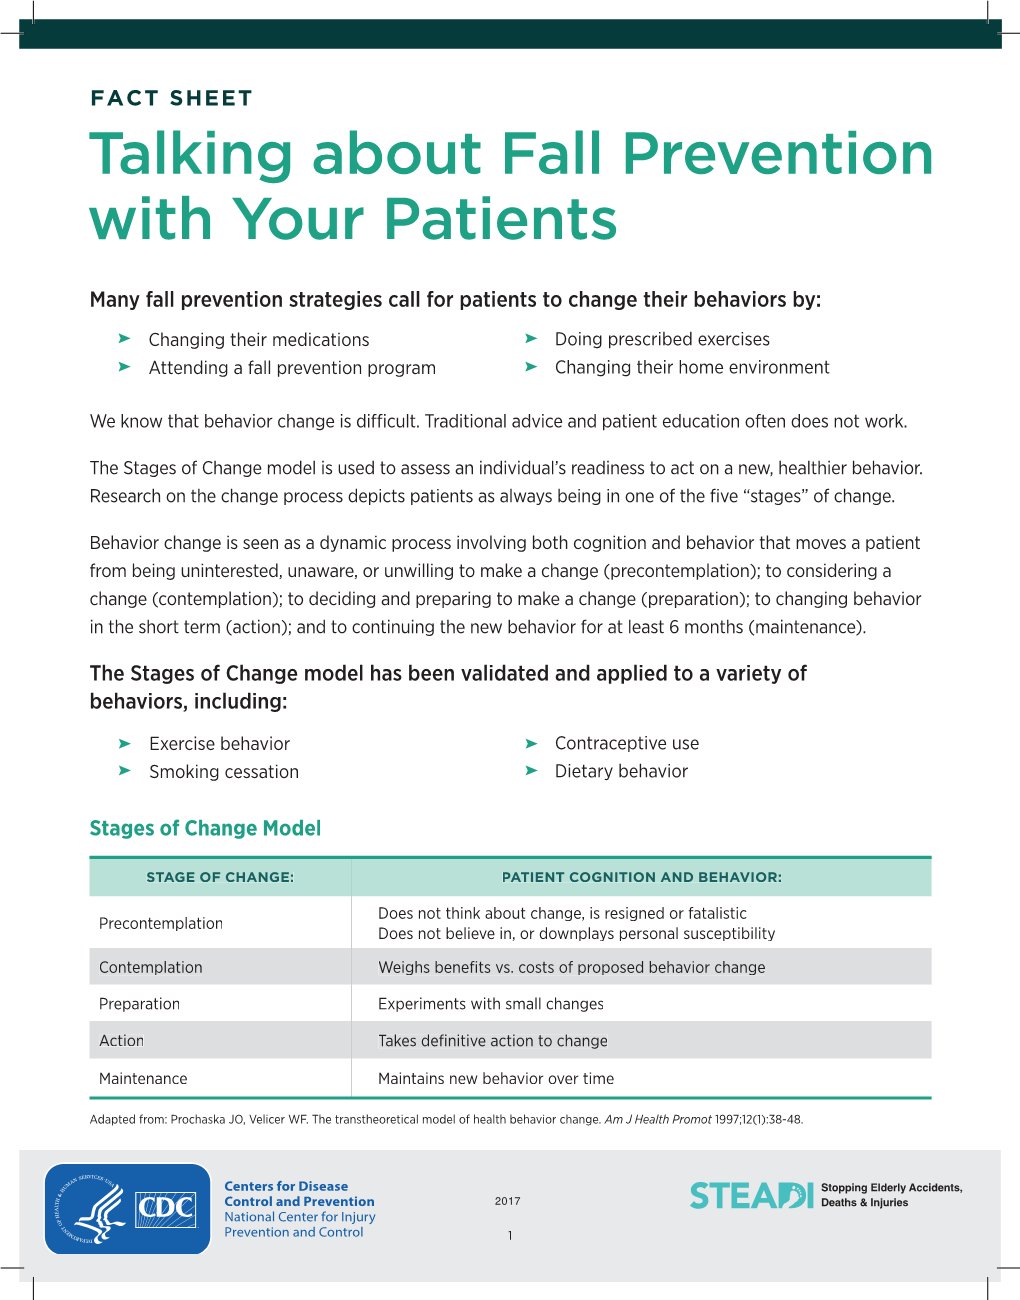 Talking About Fall Prevention with Your Patients